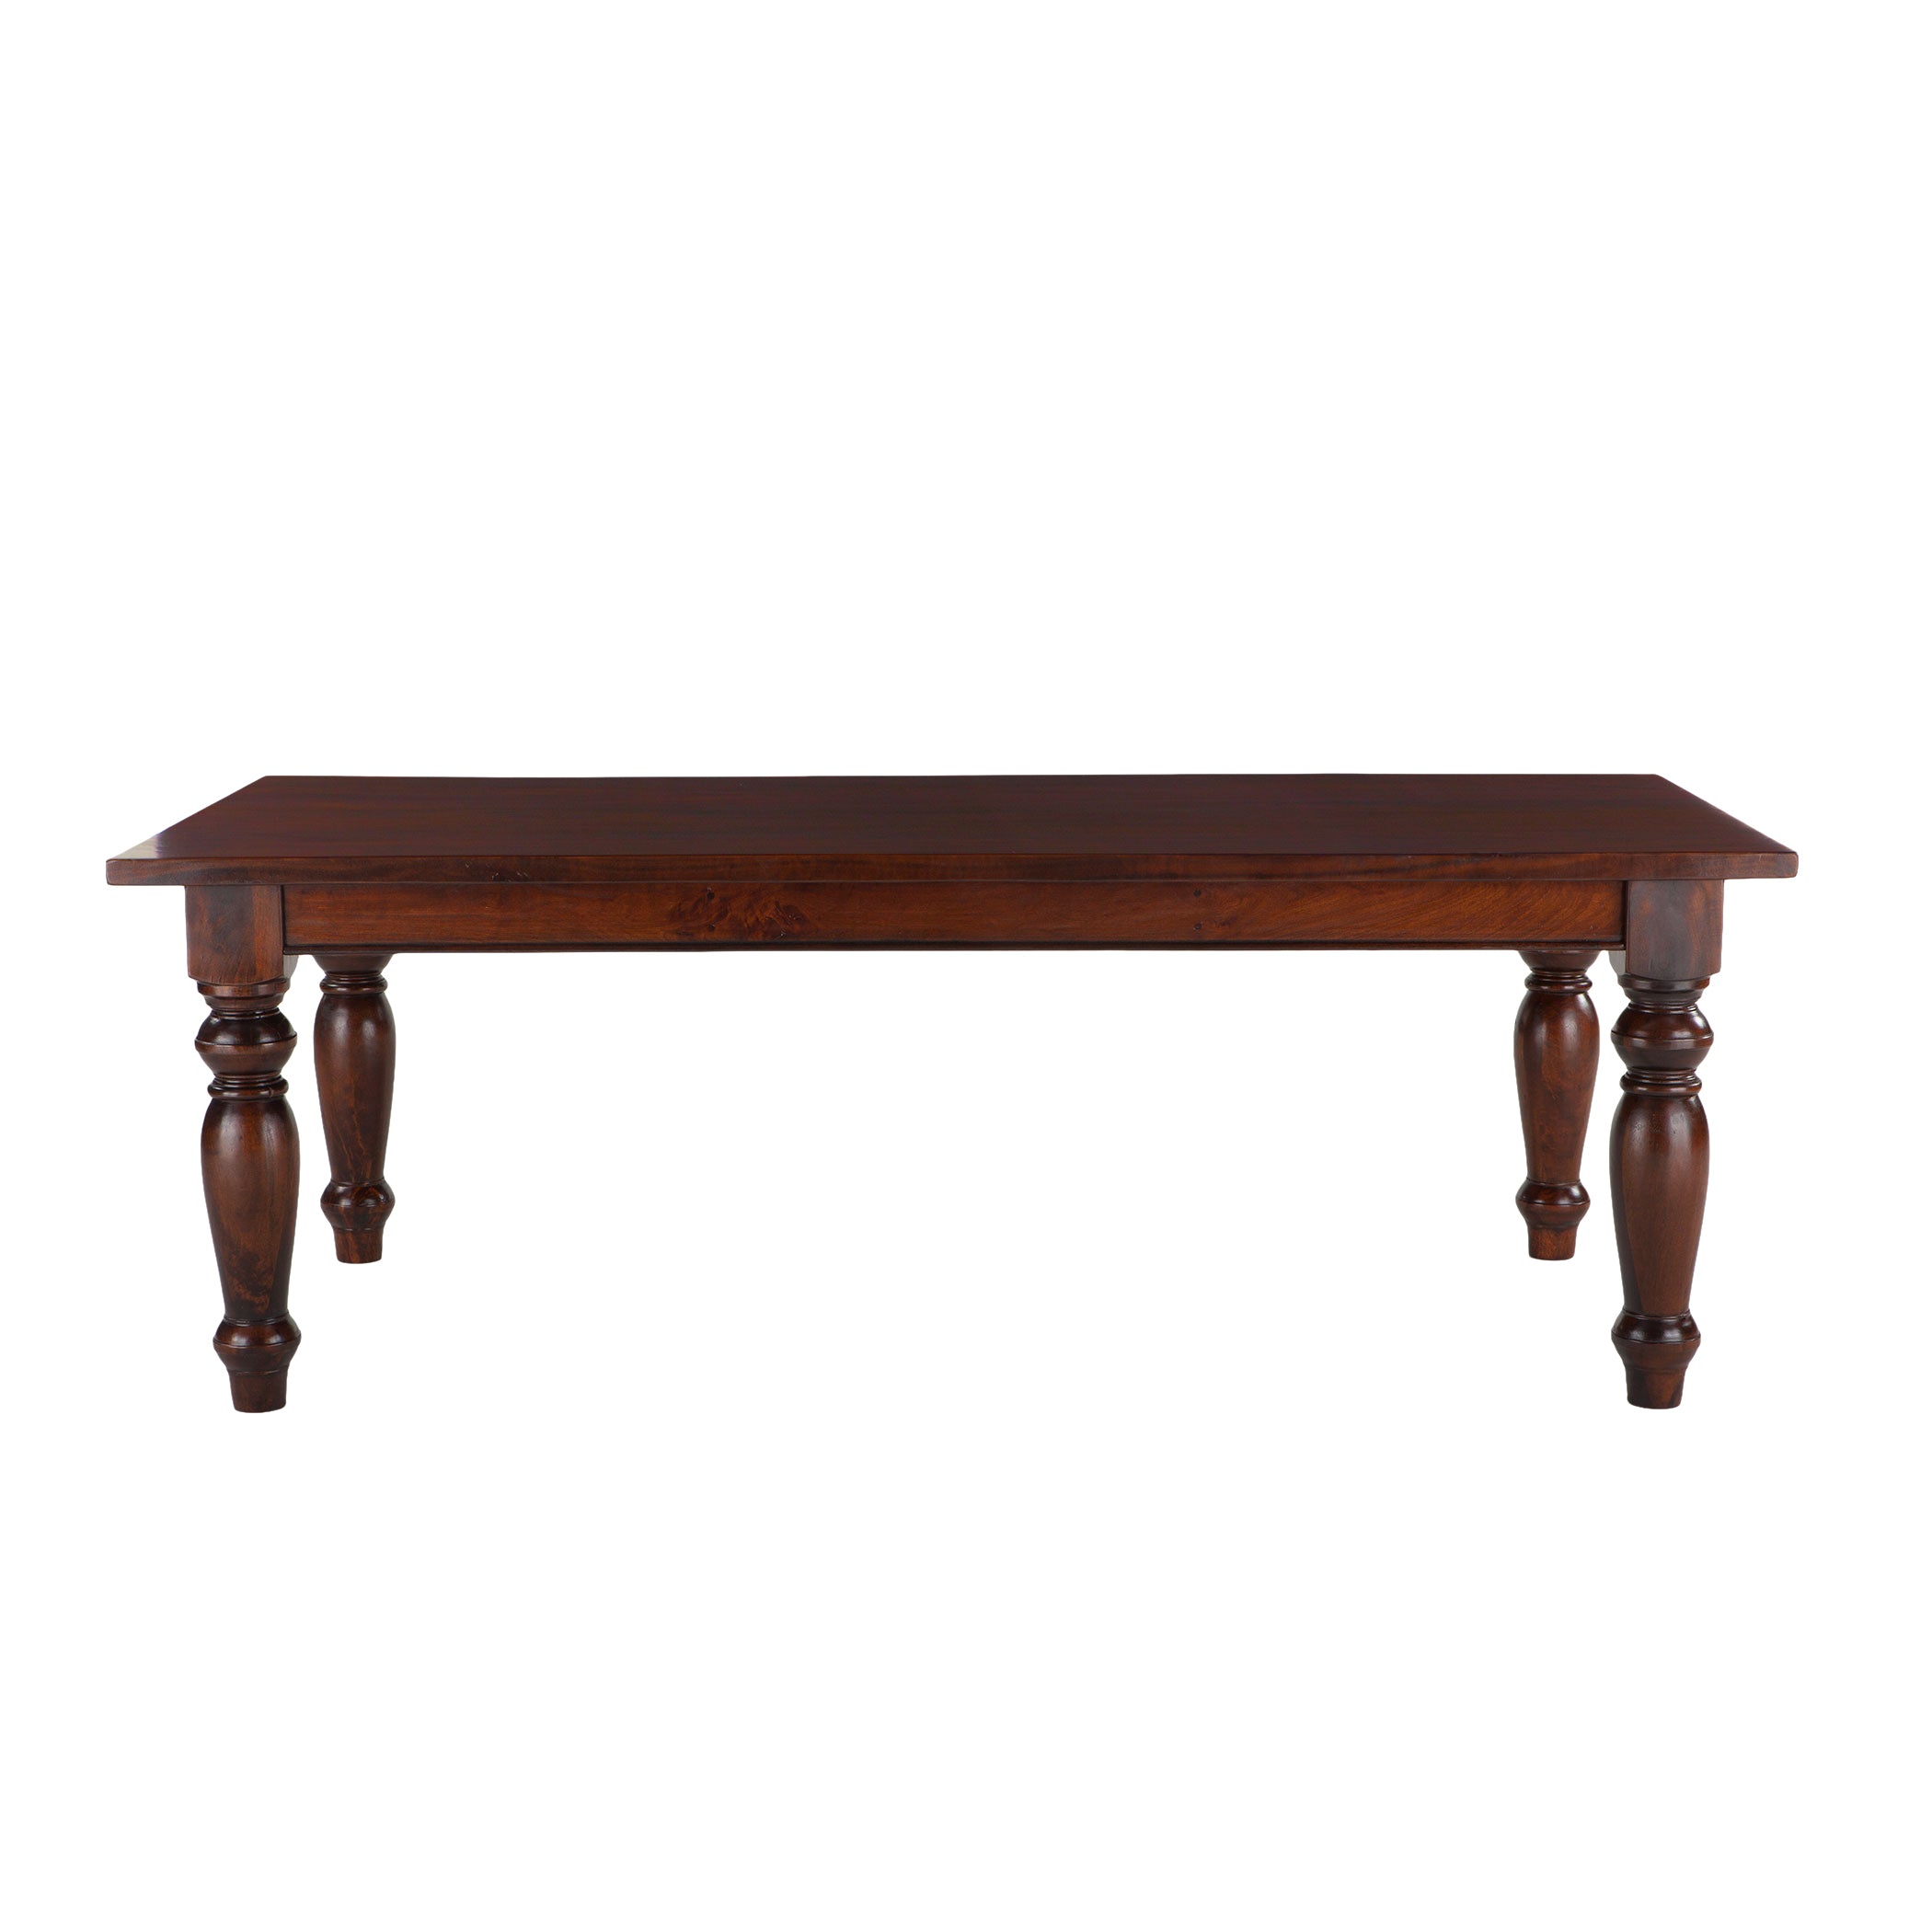 Chatham Downs Dining Table